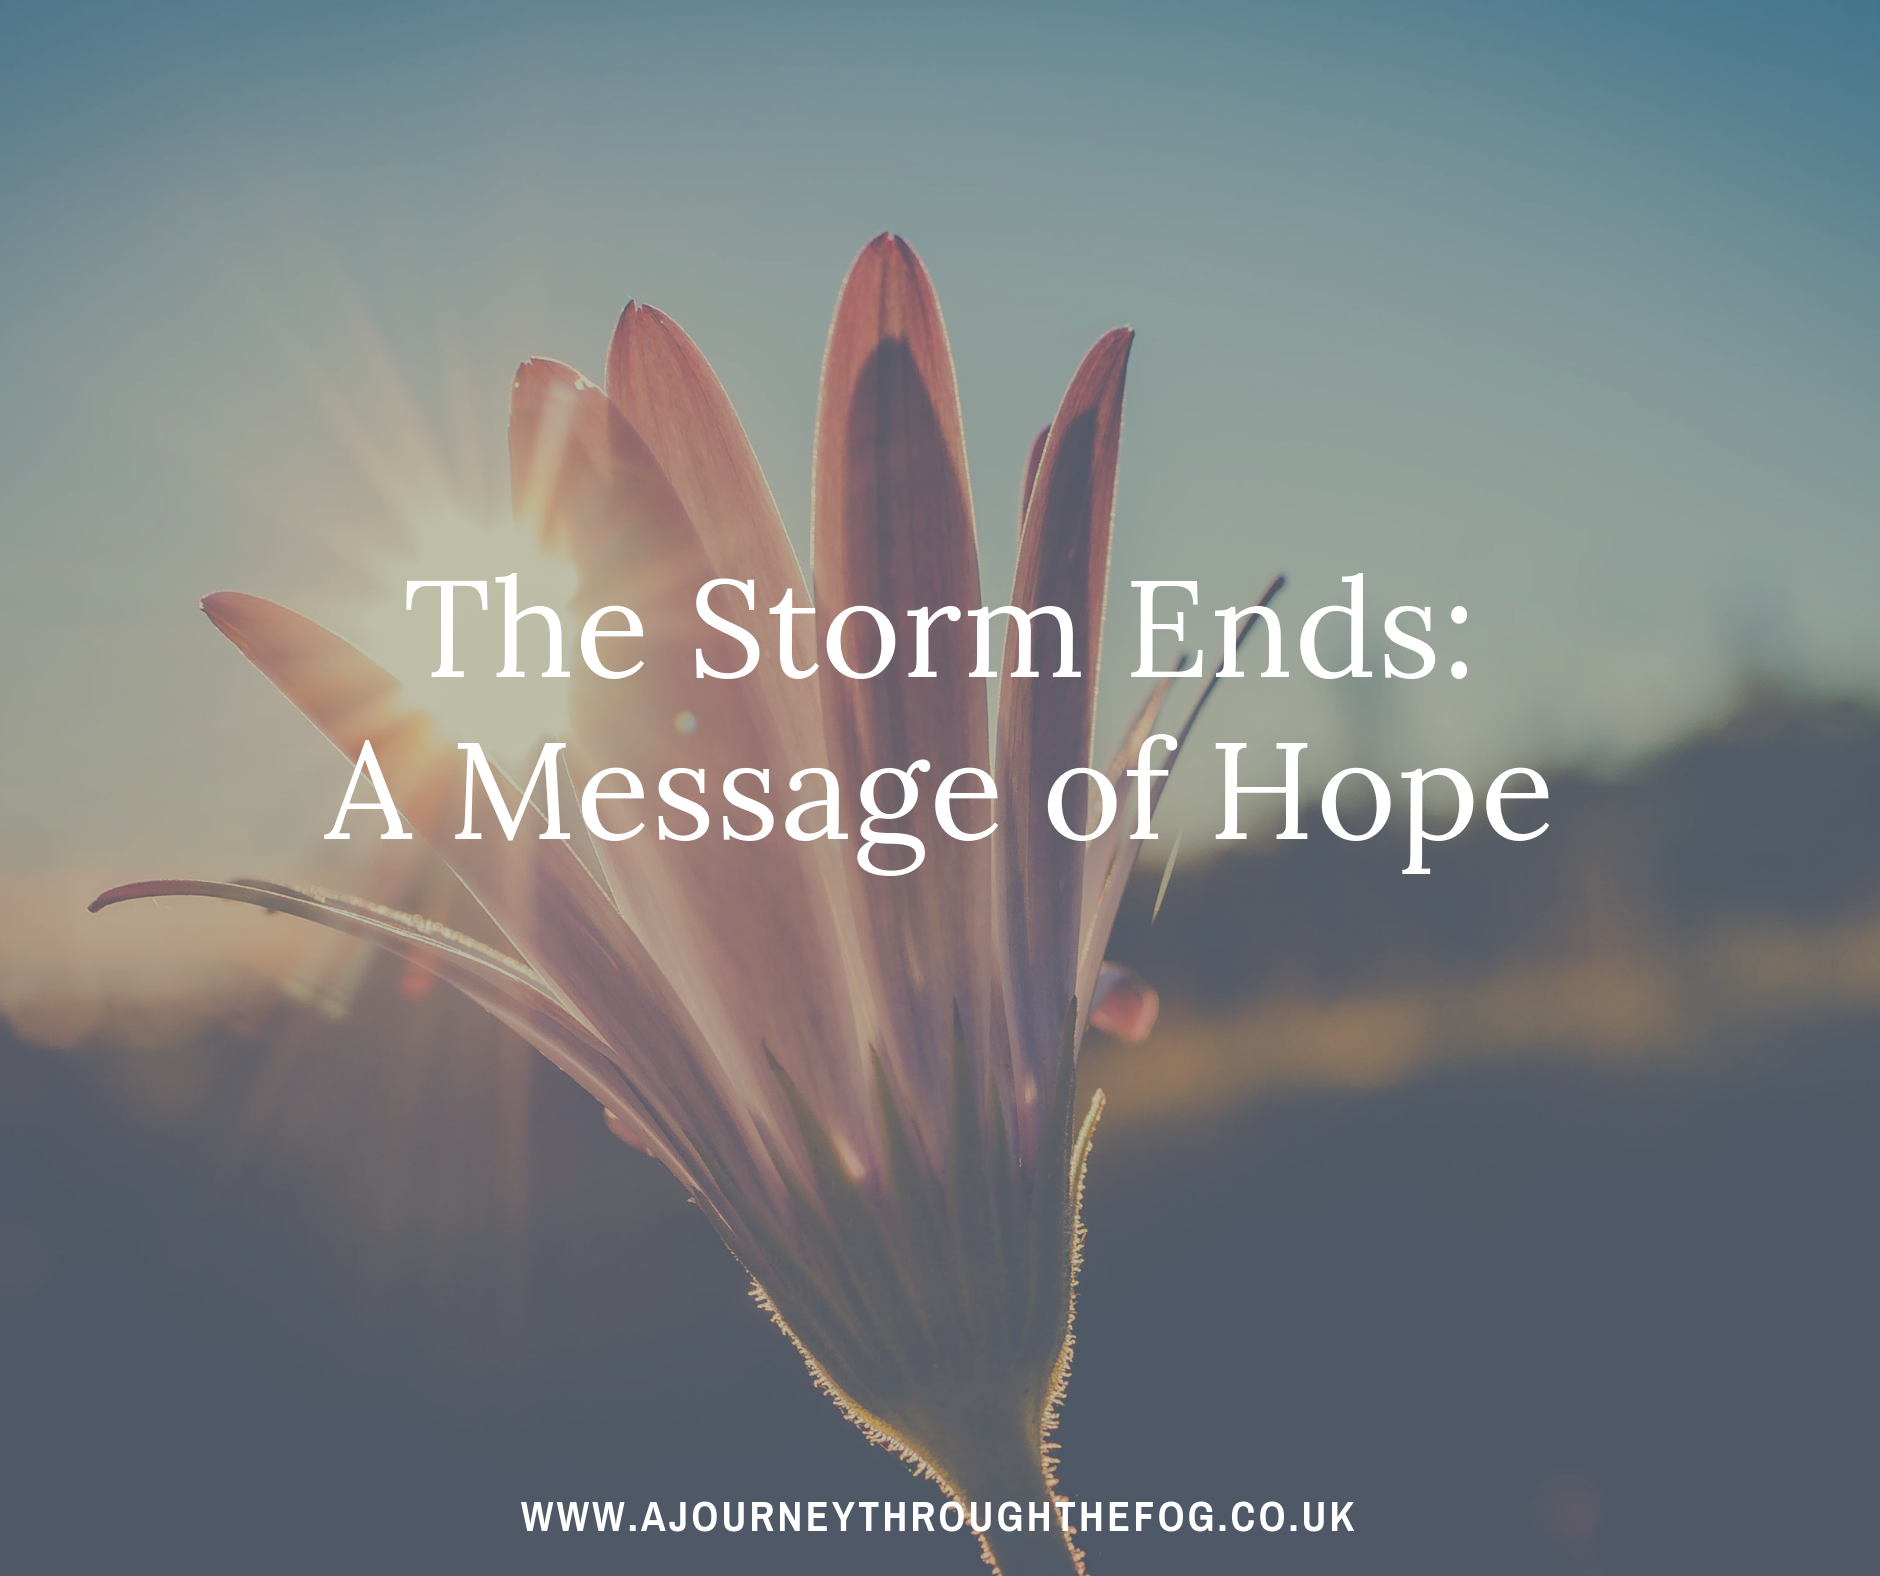 The Storm Ends: A Message of Hope - A Journey Through the Fog